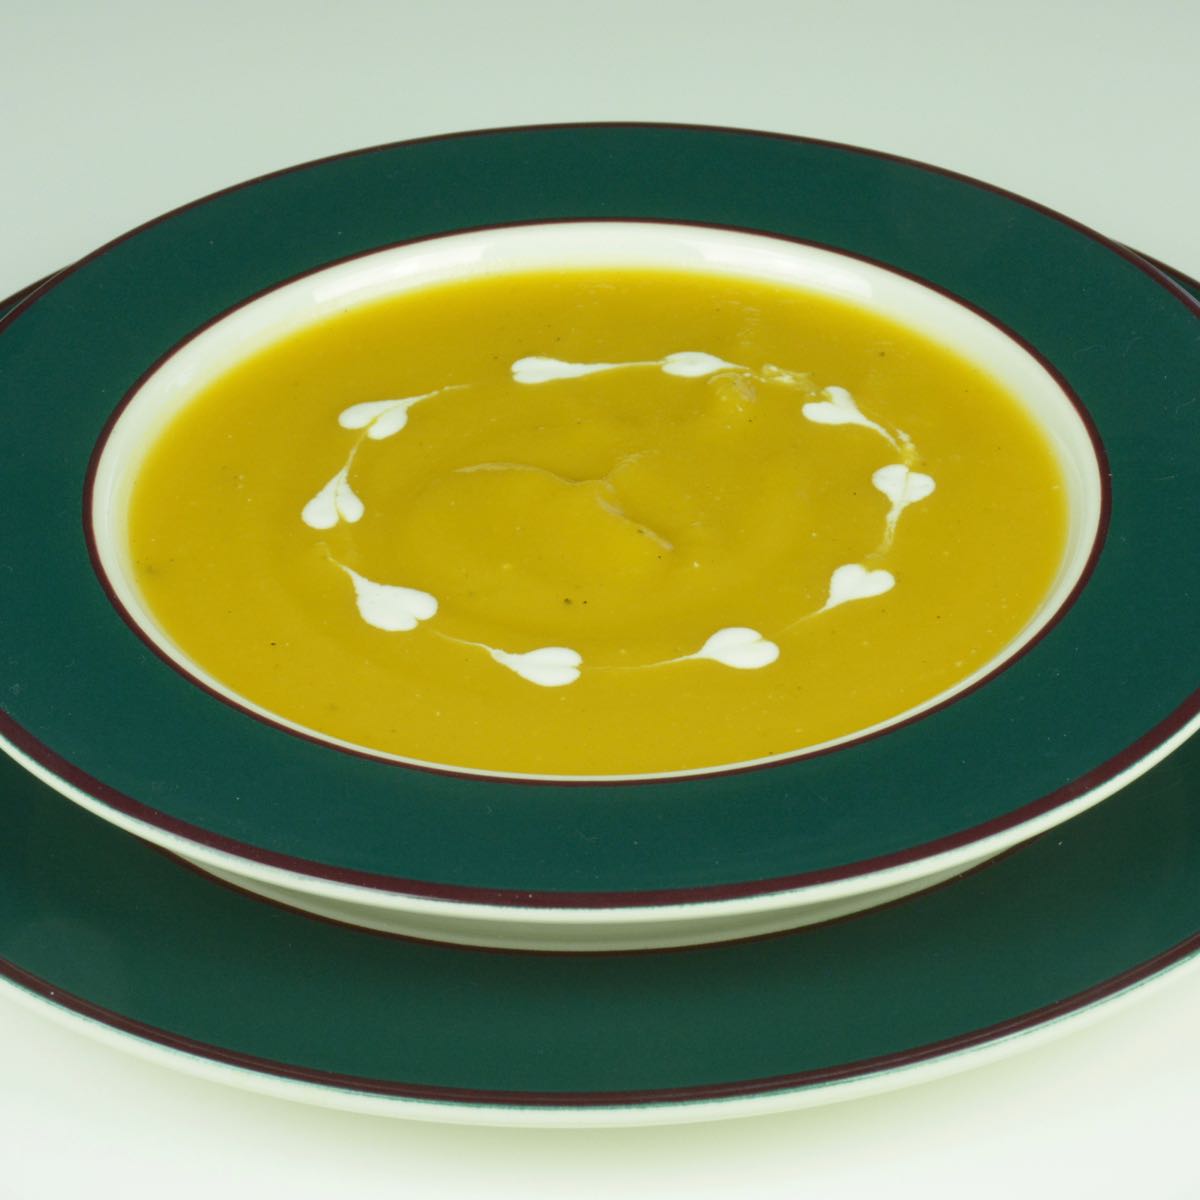 A bowl of Butternut Squash Soup with a heart design made from thinned yogurt.